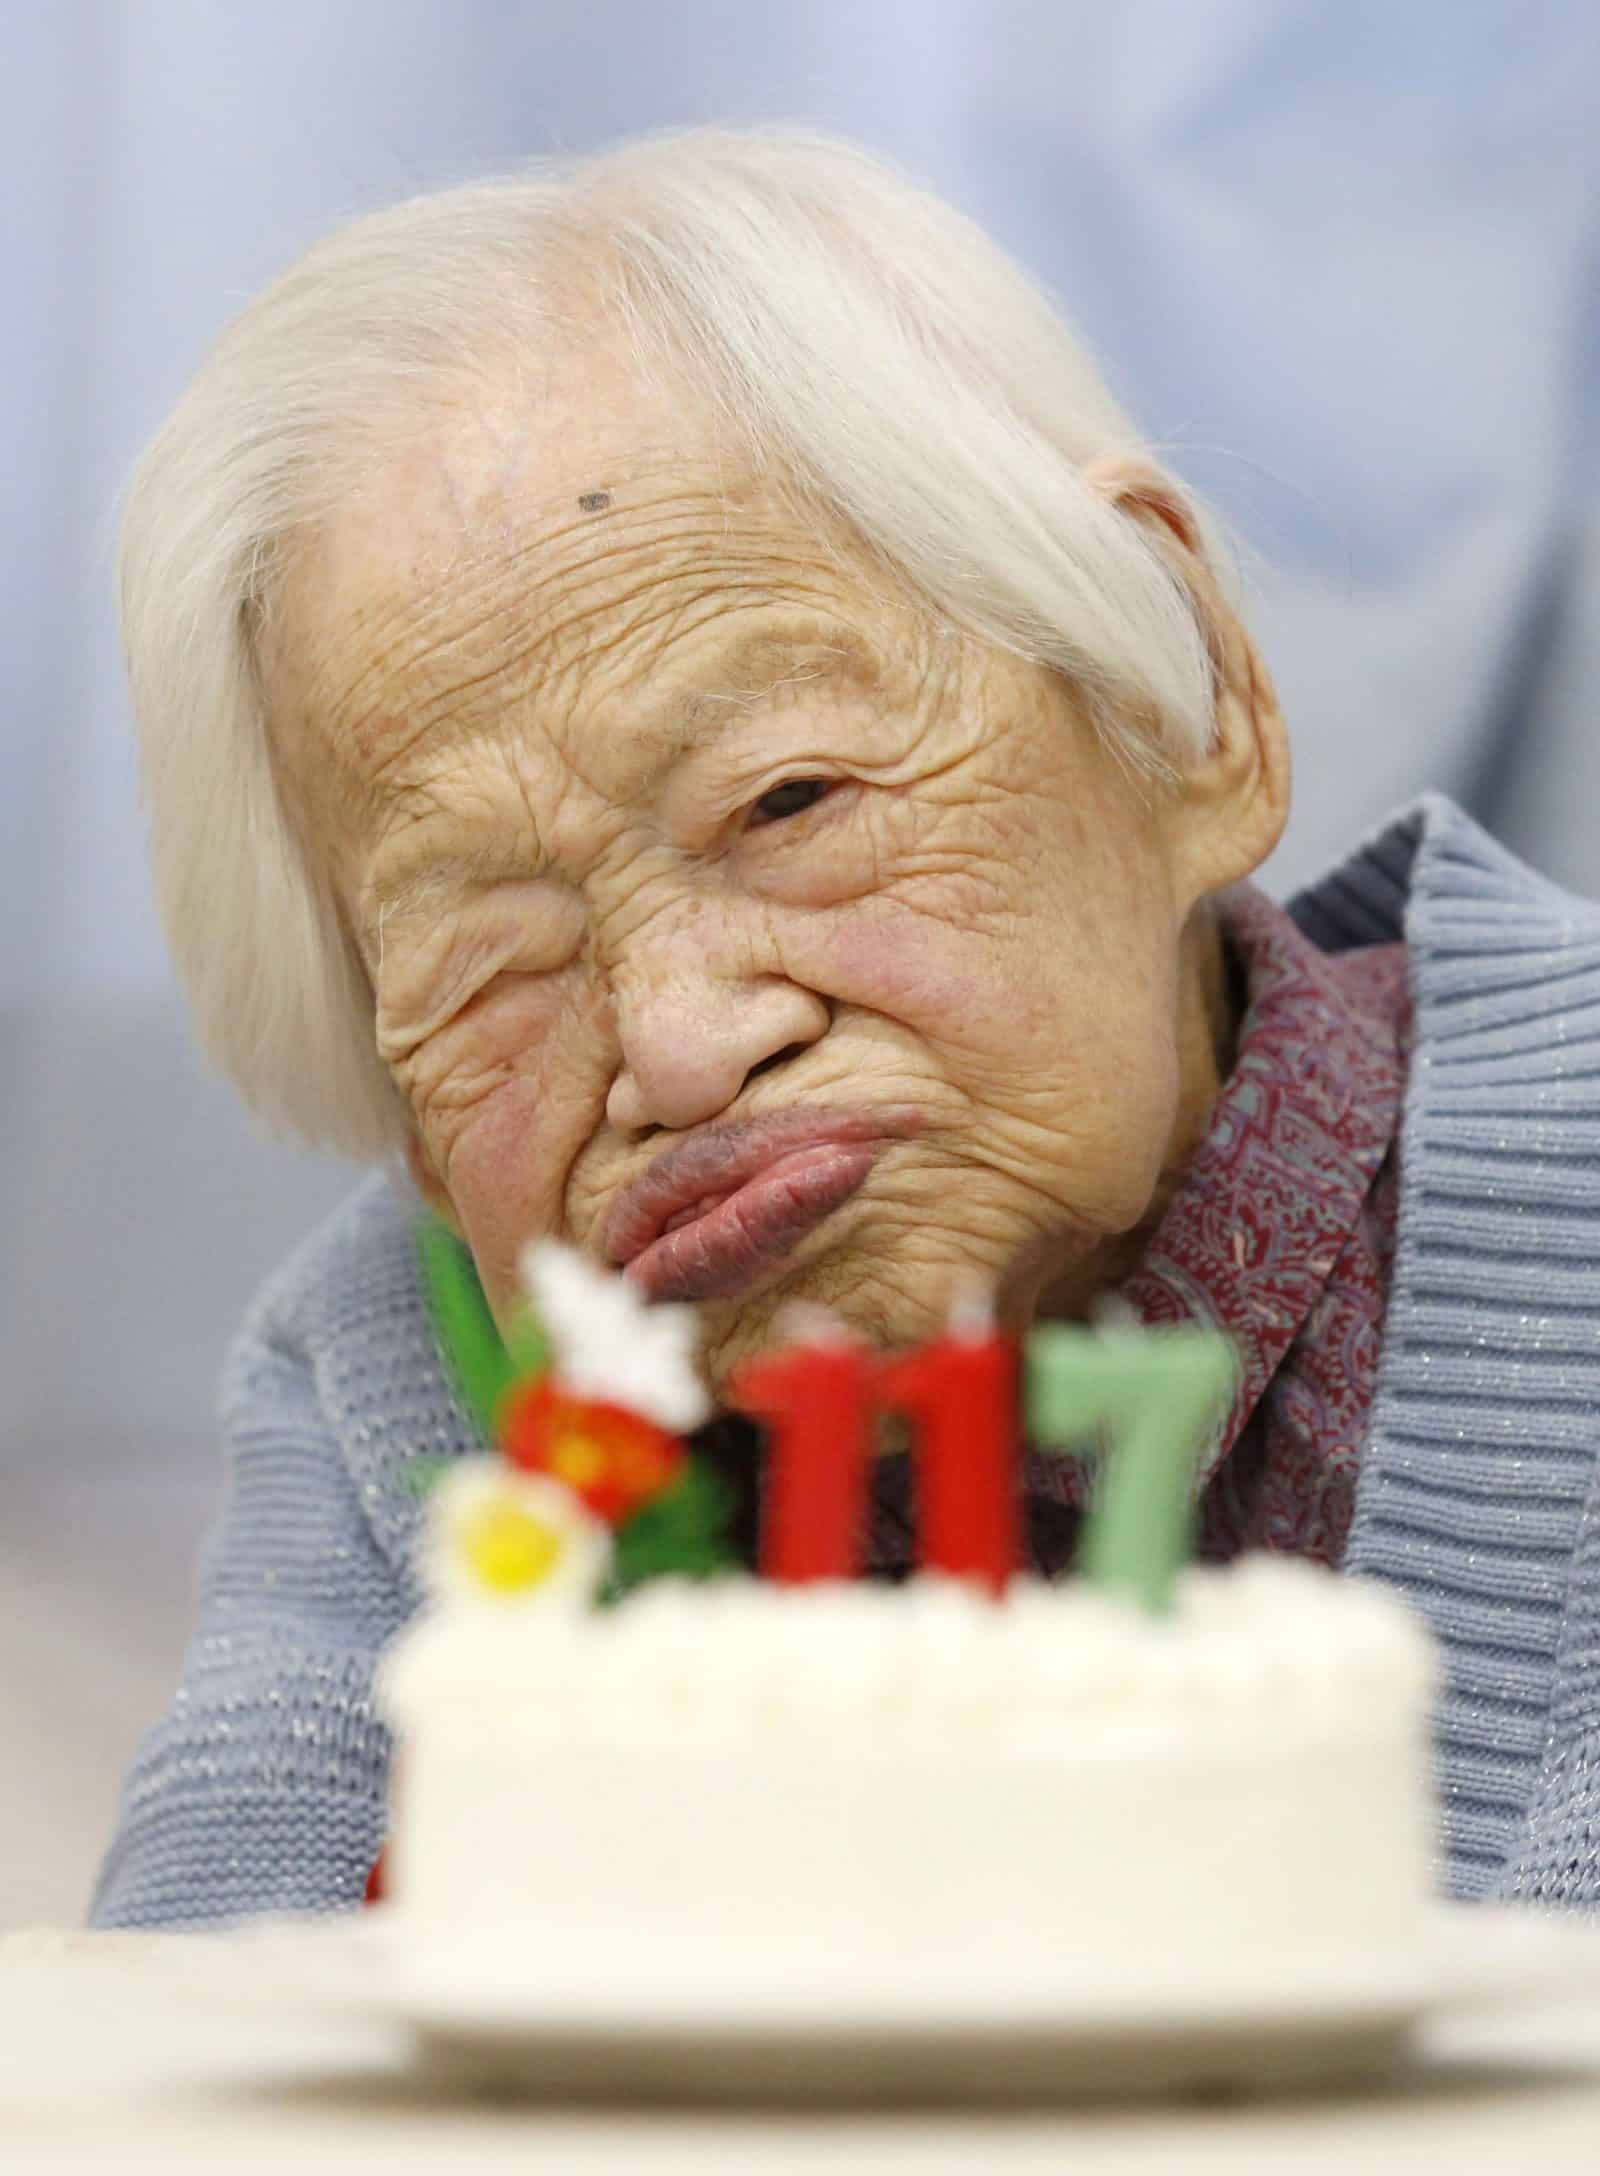 Chiyo Miyako, the World's Oldest Person, Has Died at 117